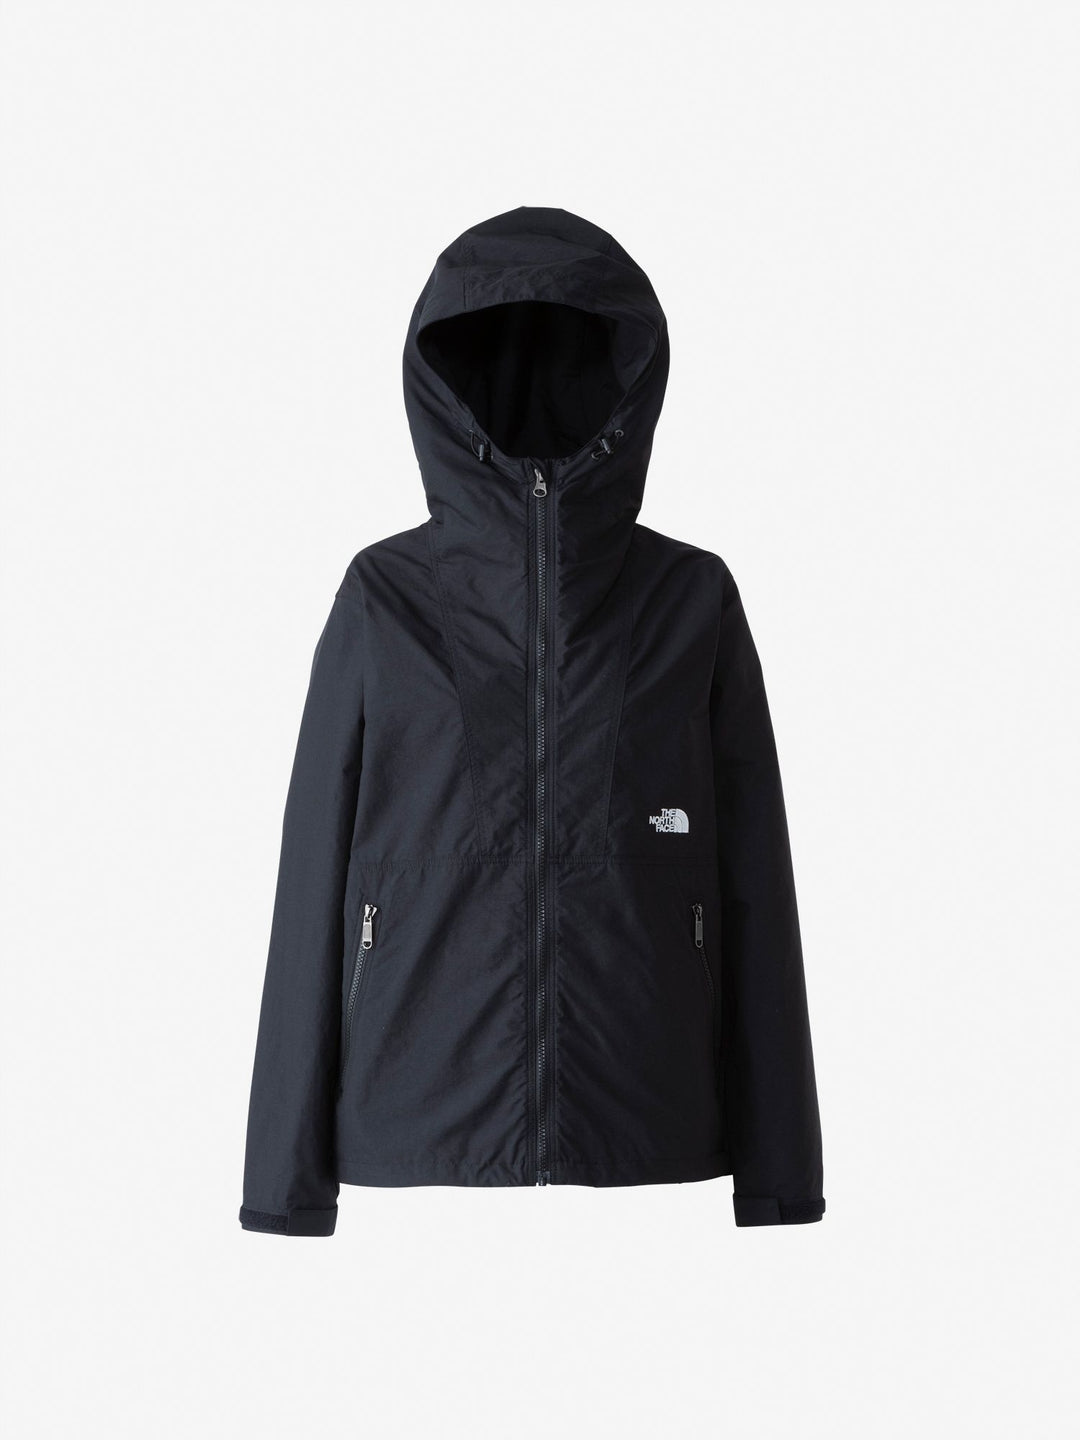 THE NORTH FACE/WOMEN　Compact Jacket COL.BLACK